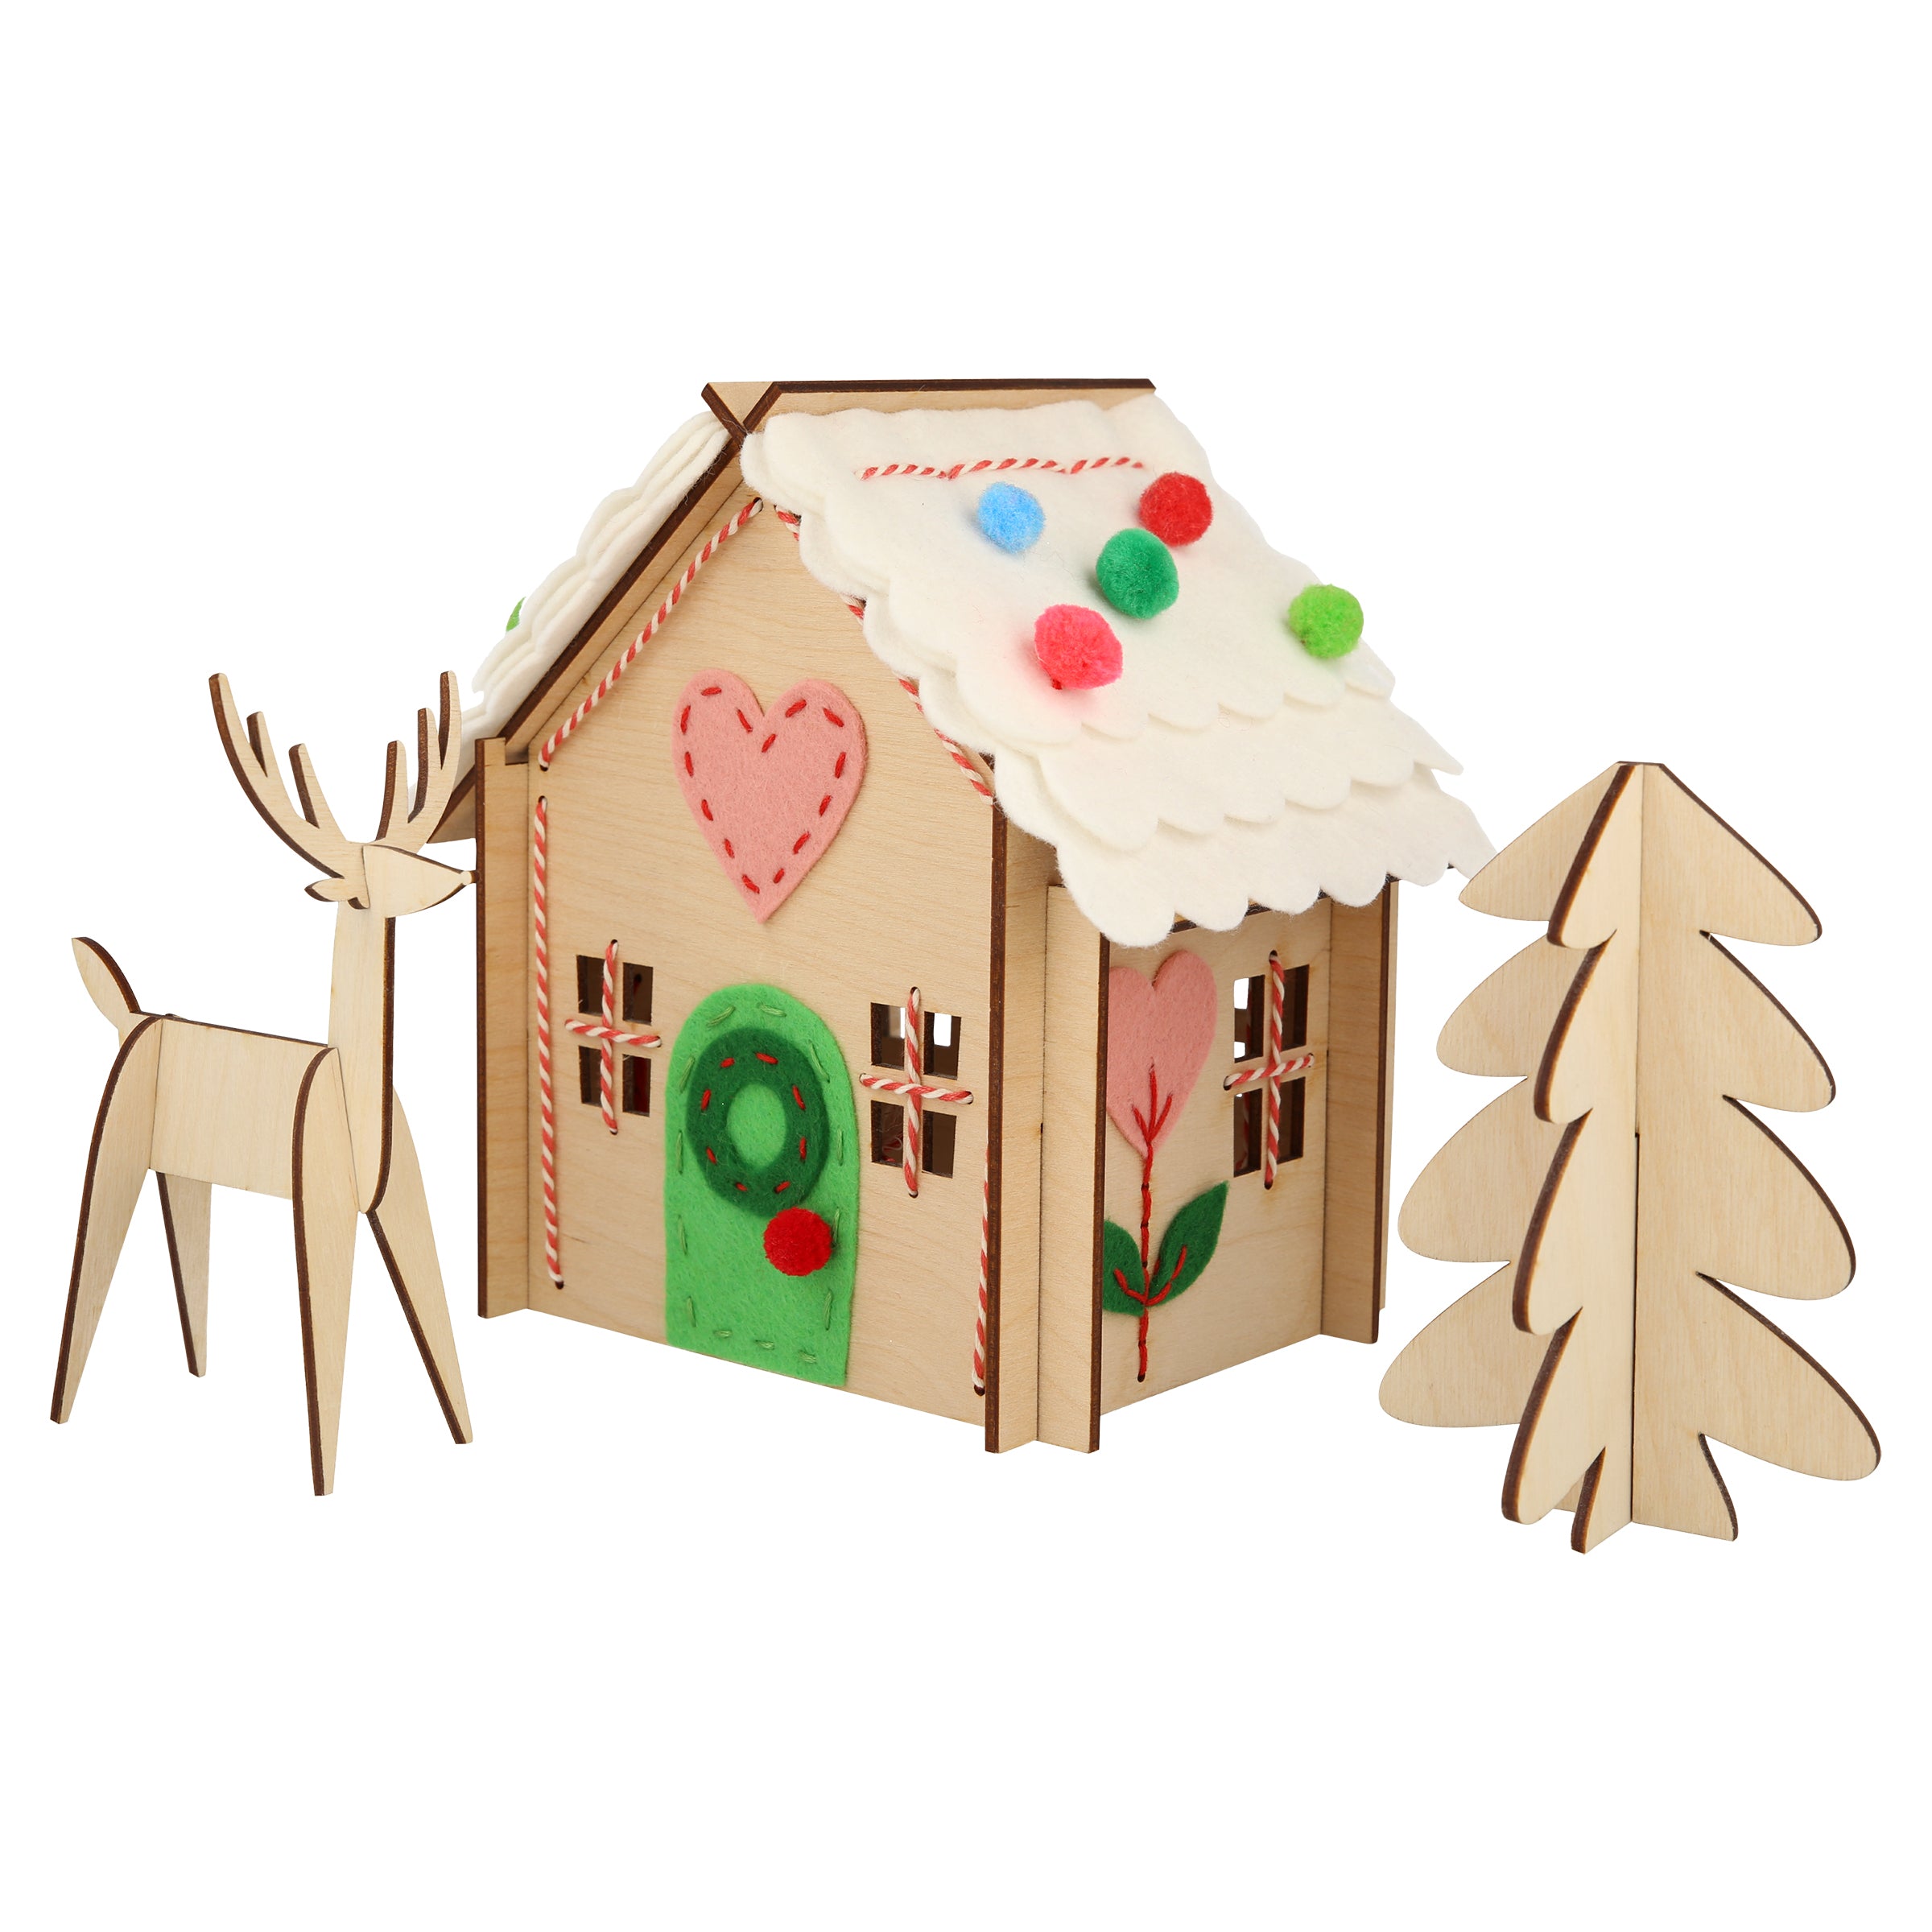 Our wooden gingerbread house features embroidery, felt and pompoms, with wooden reindeer. Perfect as a kids craft project.